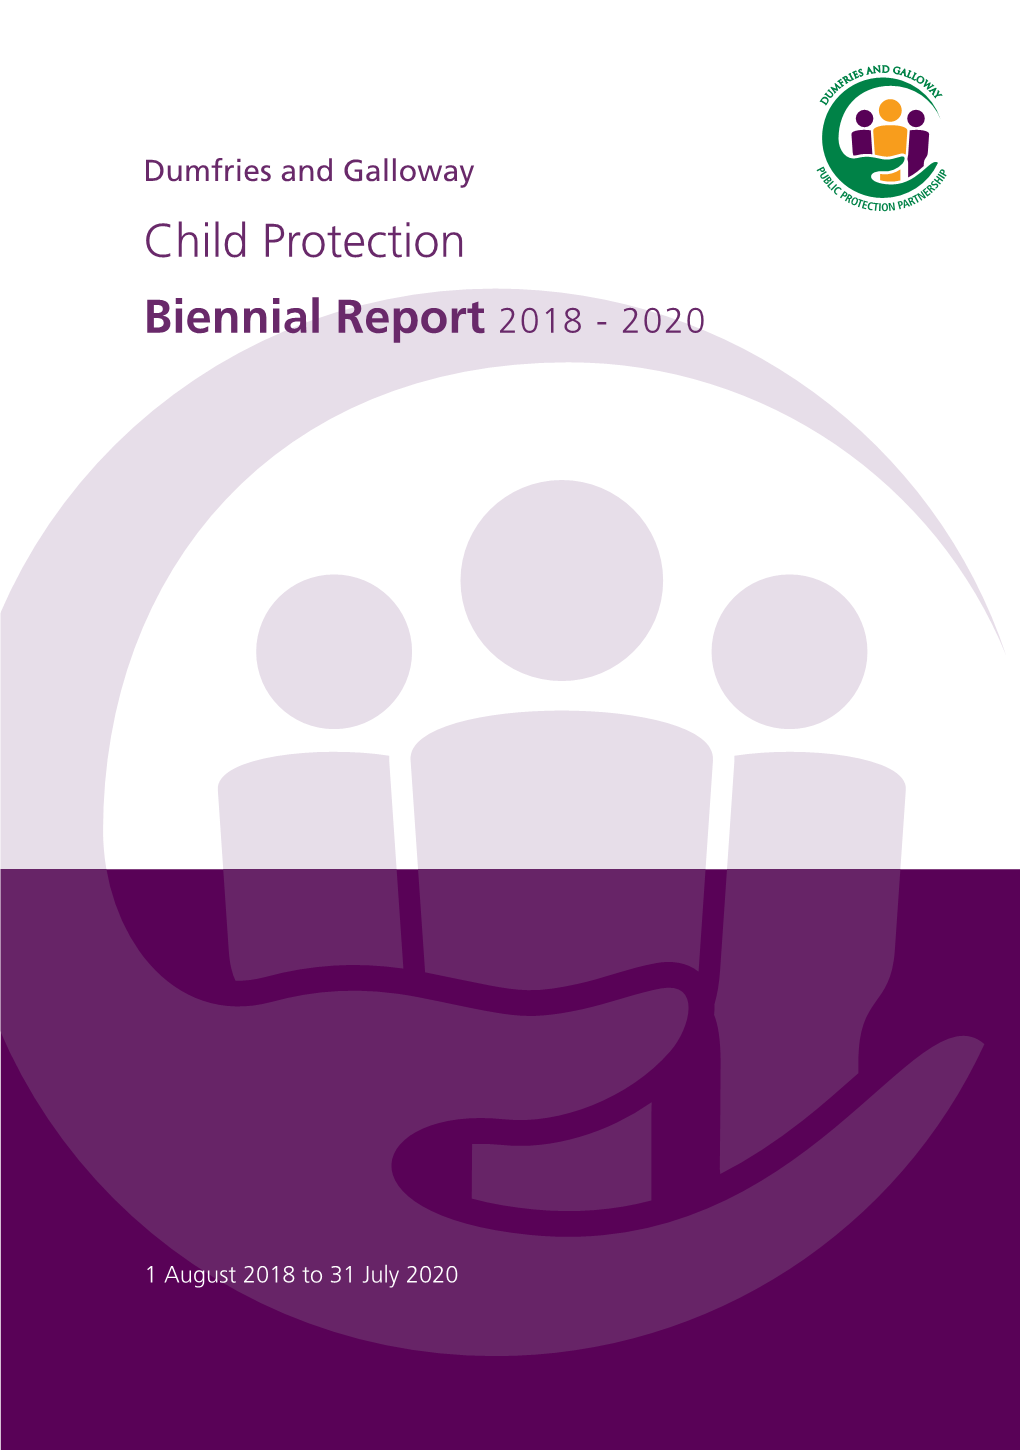 Child Protection Biennial Report 2018 - 2020